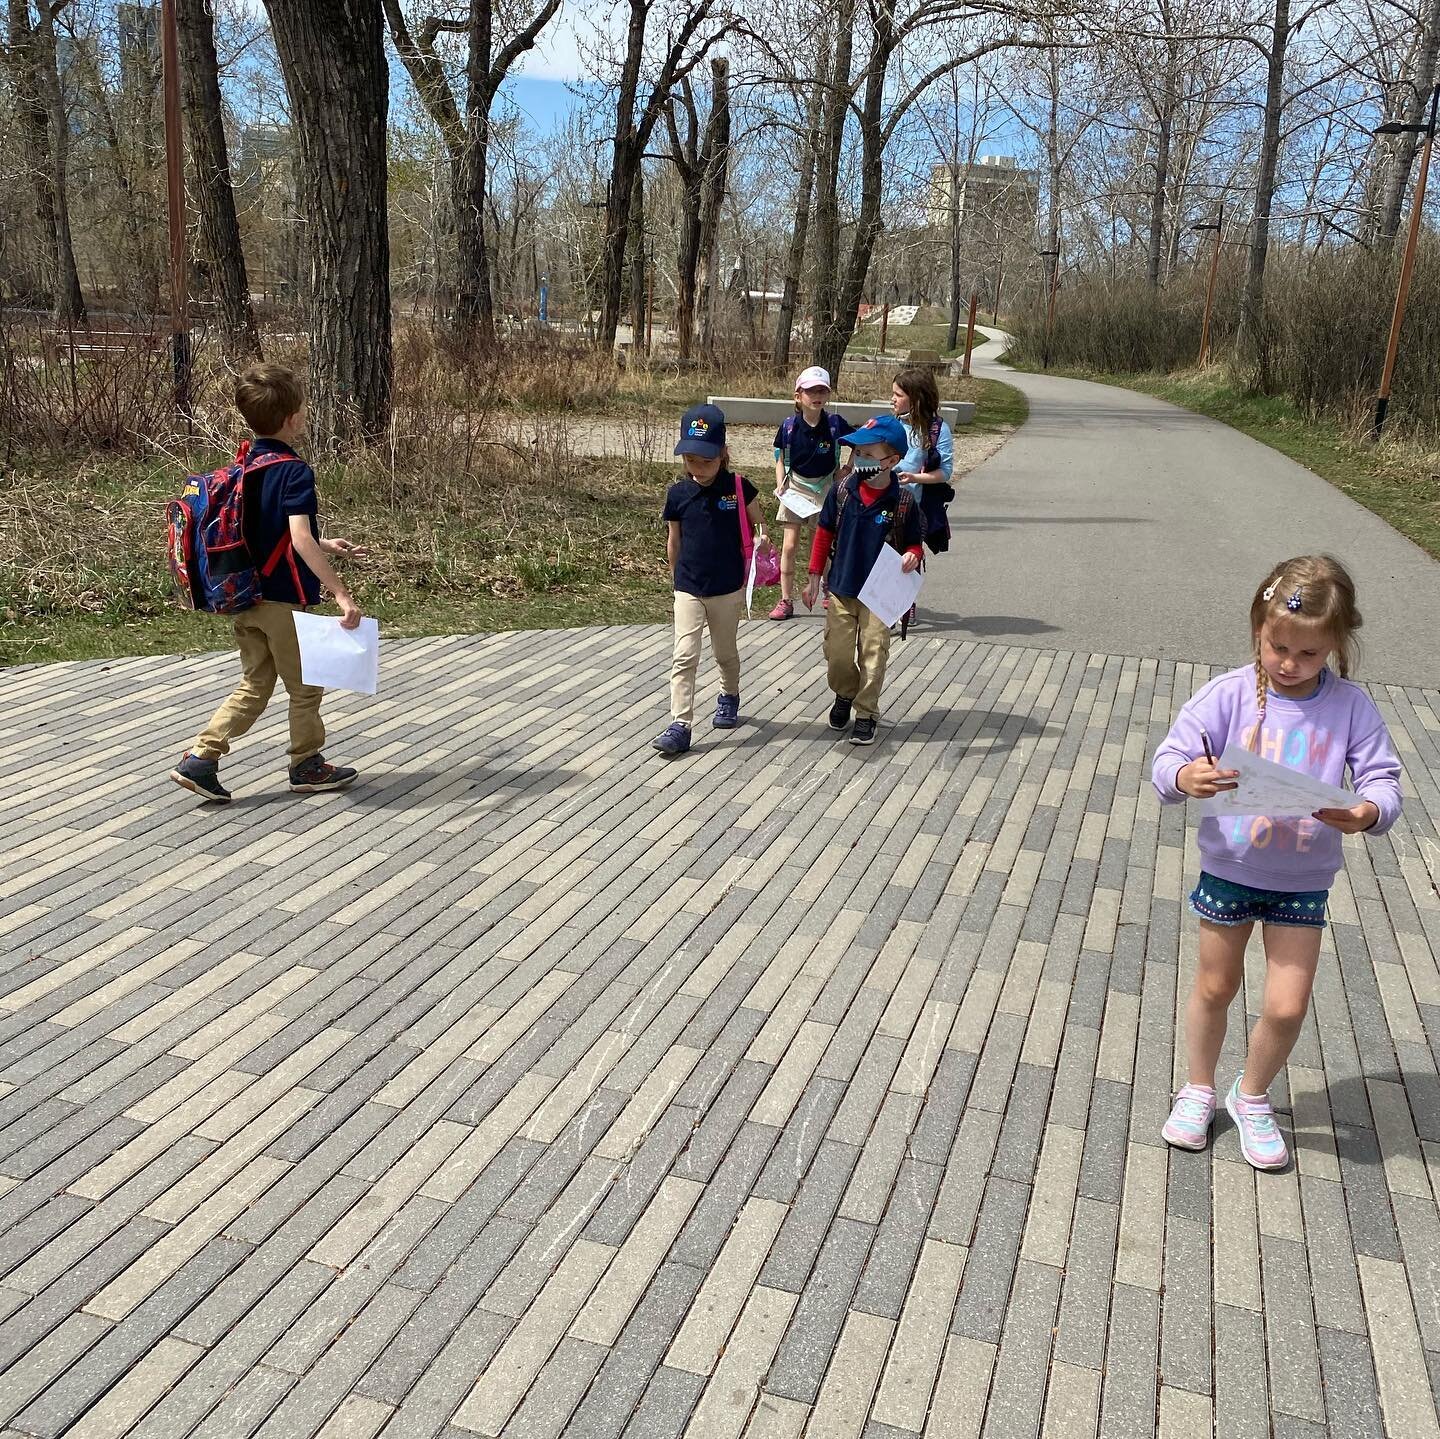 Spring scavenger hunt and picnic today seems like a perfect way to end the week! #adventuretime #stpatricksisland #springisintheair